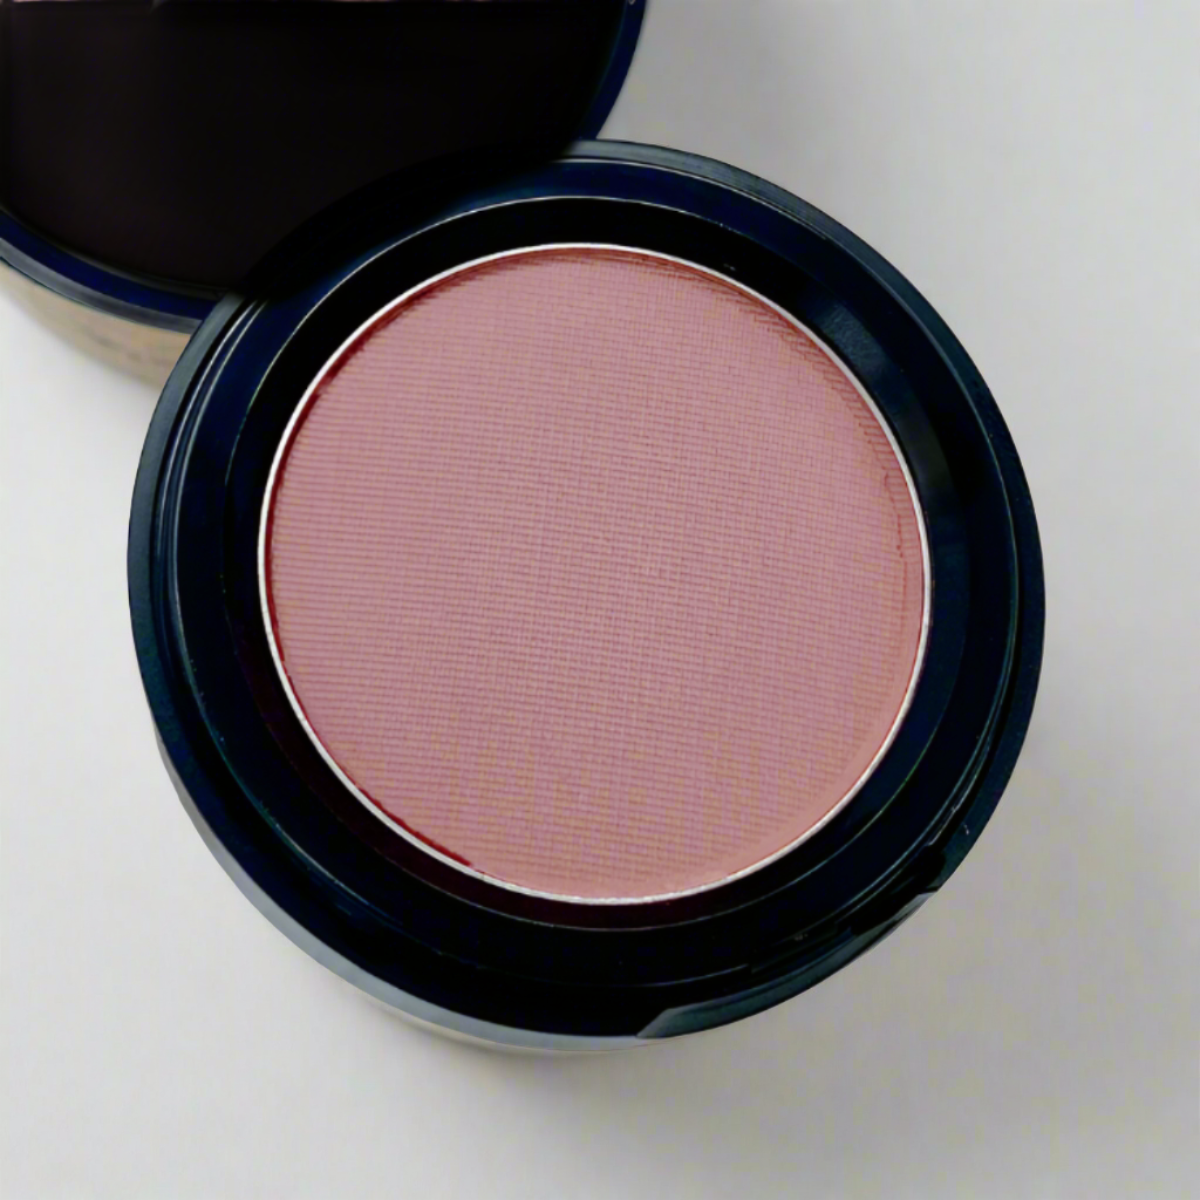  Cosmetic container of light mauve pink matte pressed blush displaying its color and texture